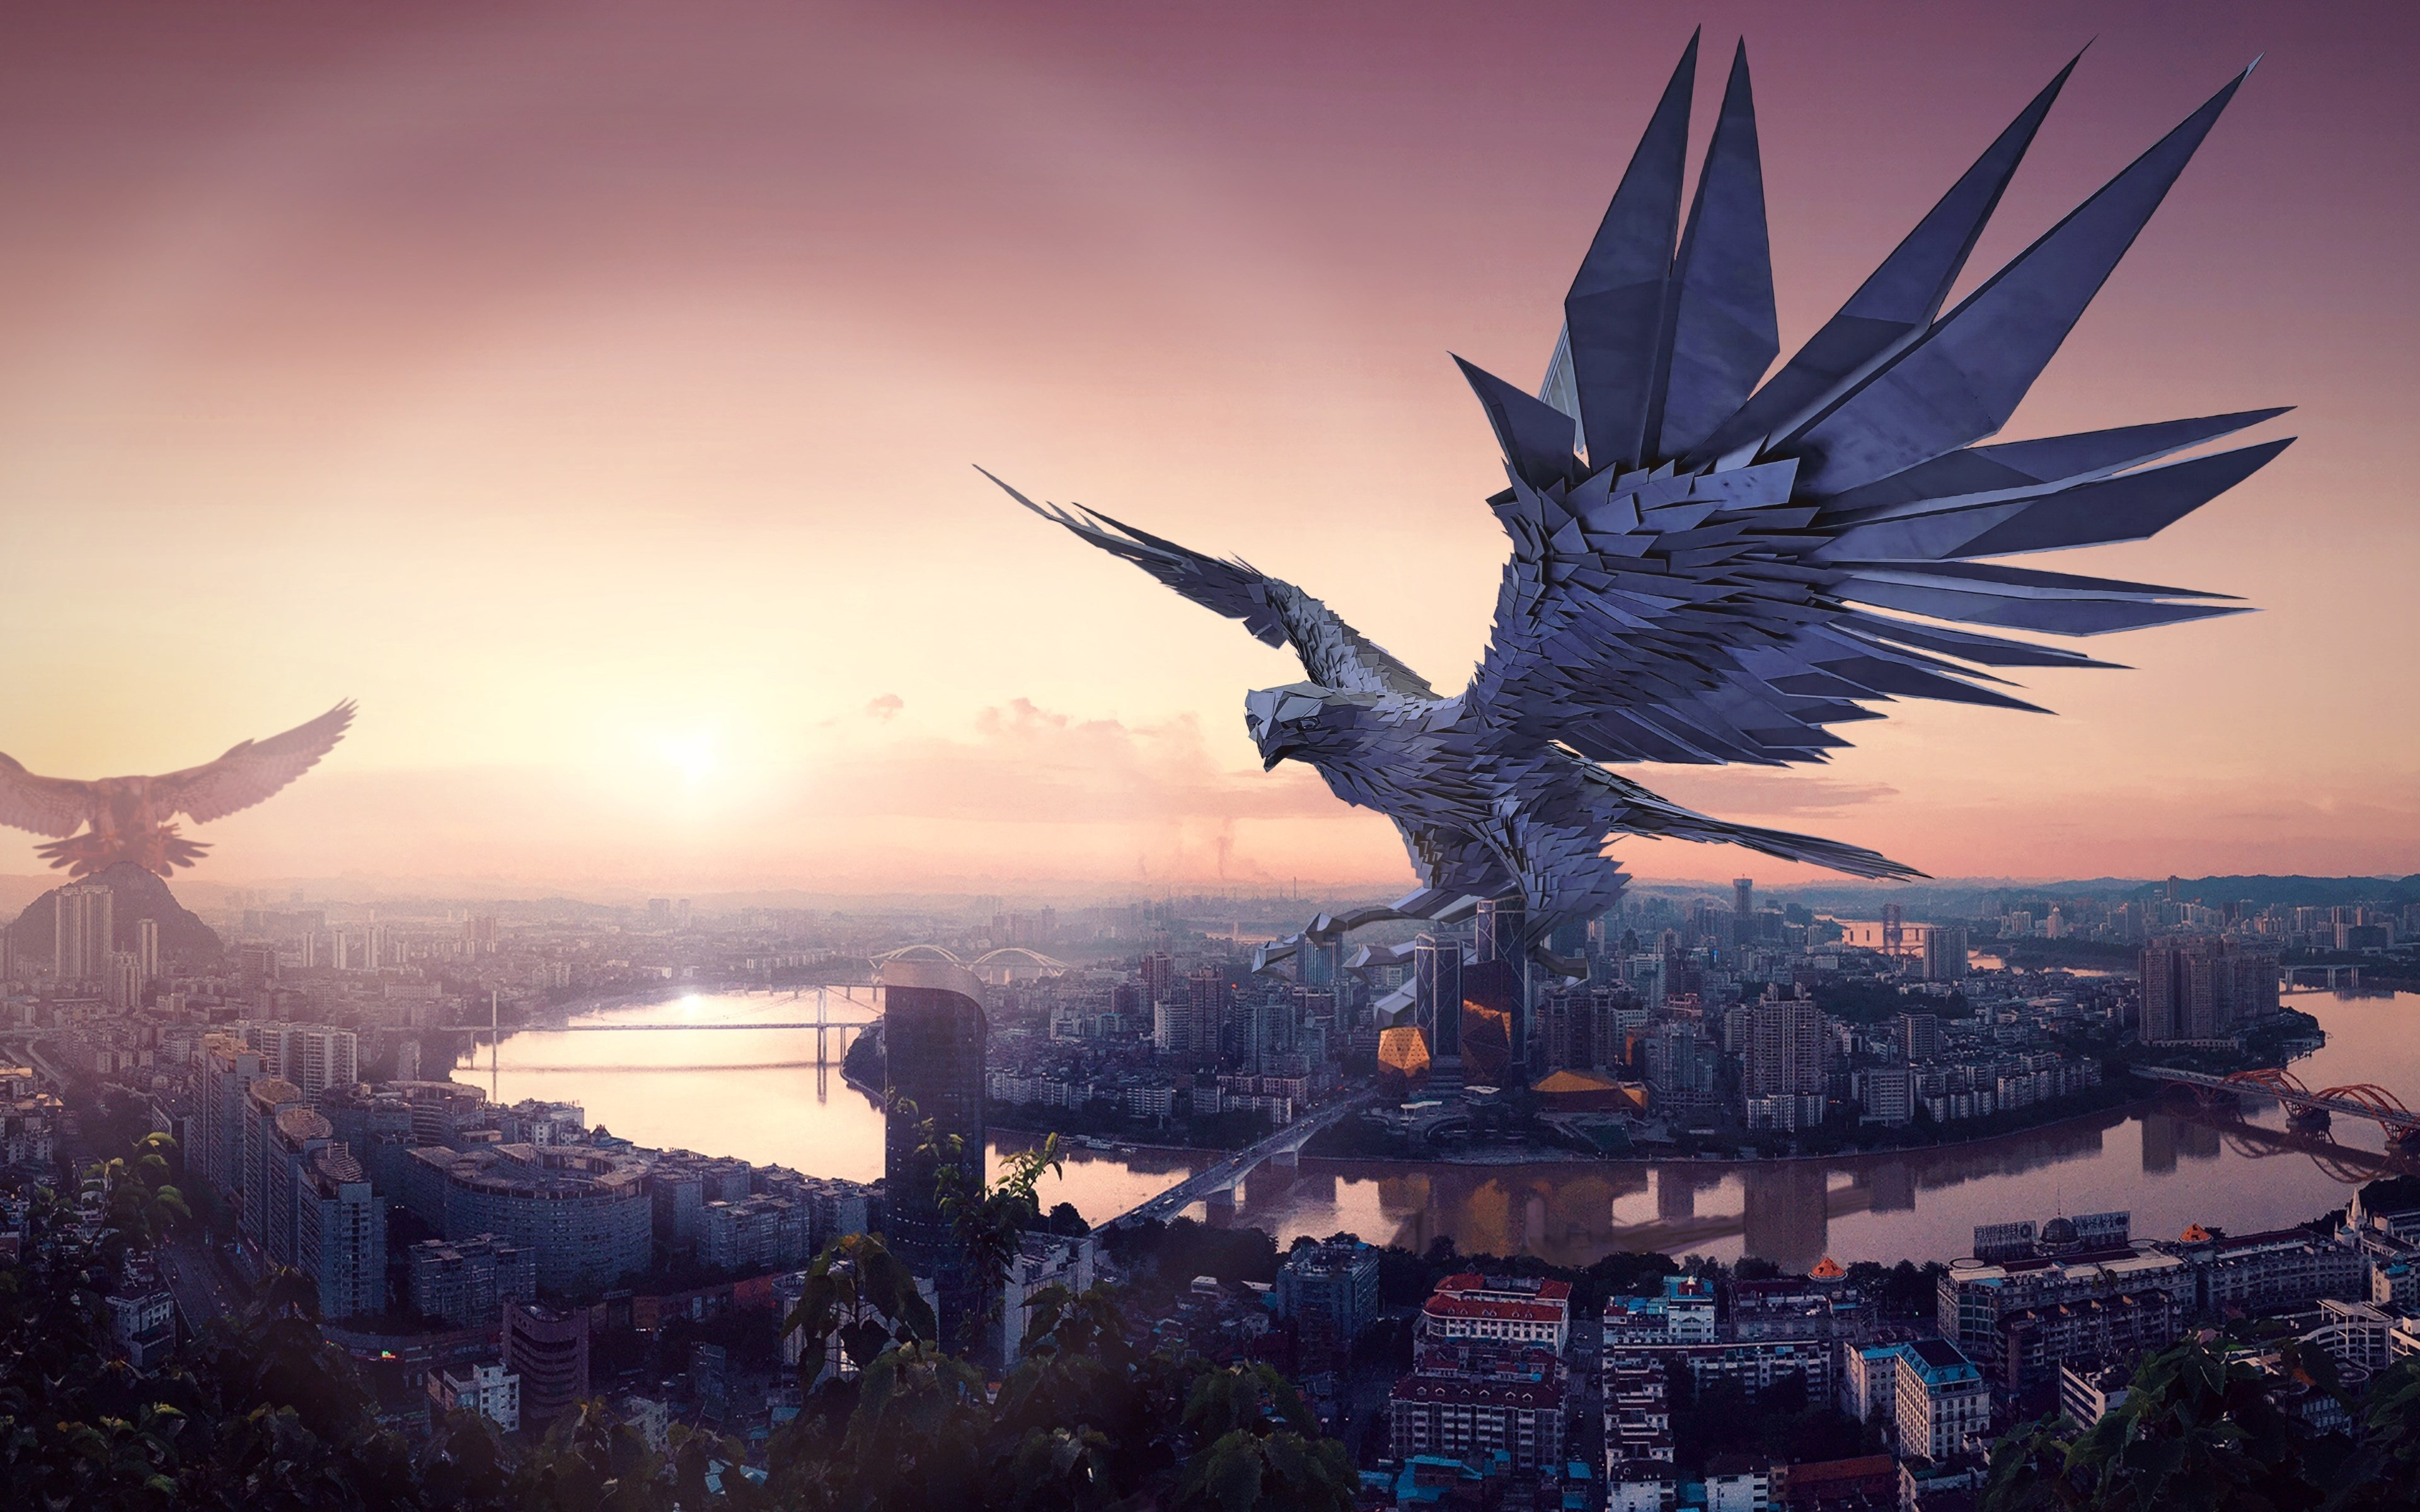 The falcon, protector of the city wallpaper 3840x2400